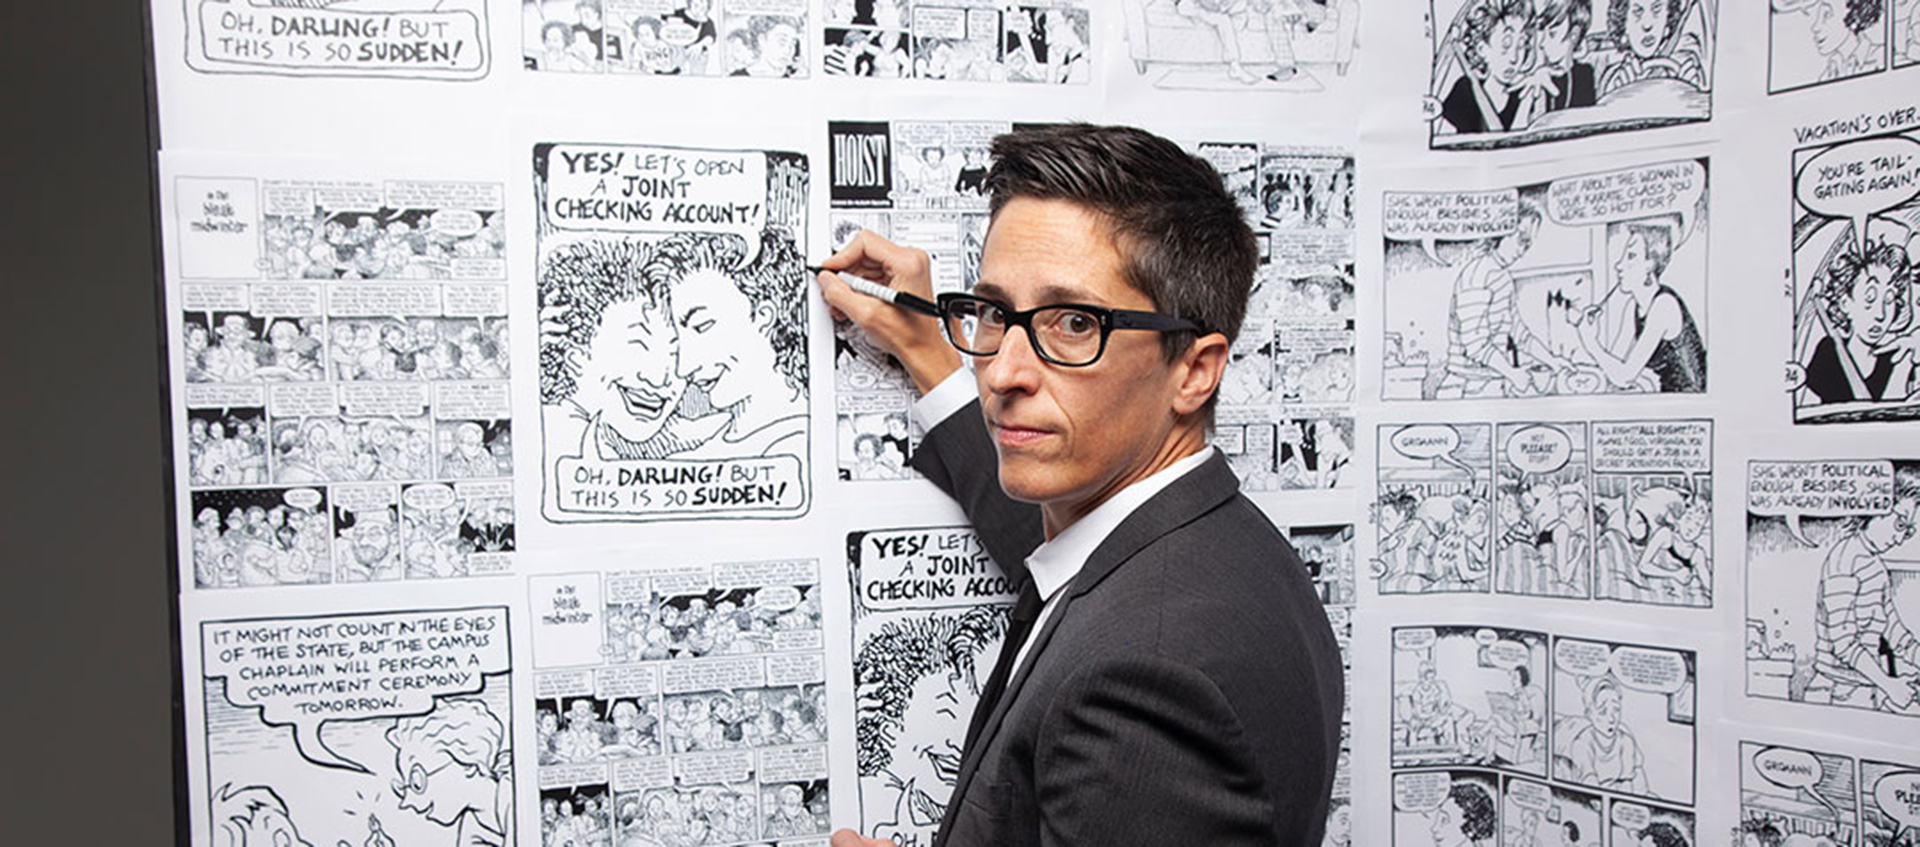 Photo of cartoonist Alison Bechdel looking over her shoulder at the camera. She has short, dark hair and is wearing a suit and glasses. She is holding a marker against a white backdrop full of comics in black ink. 